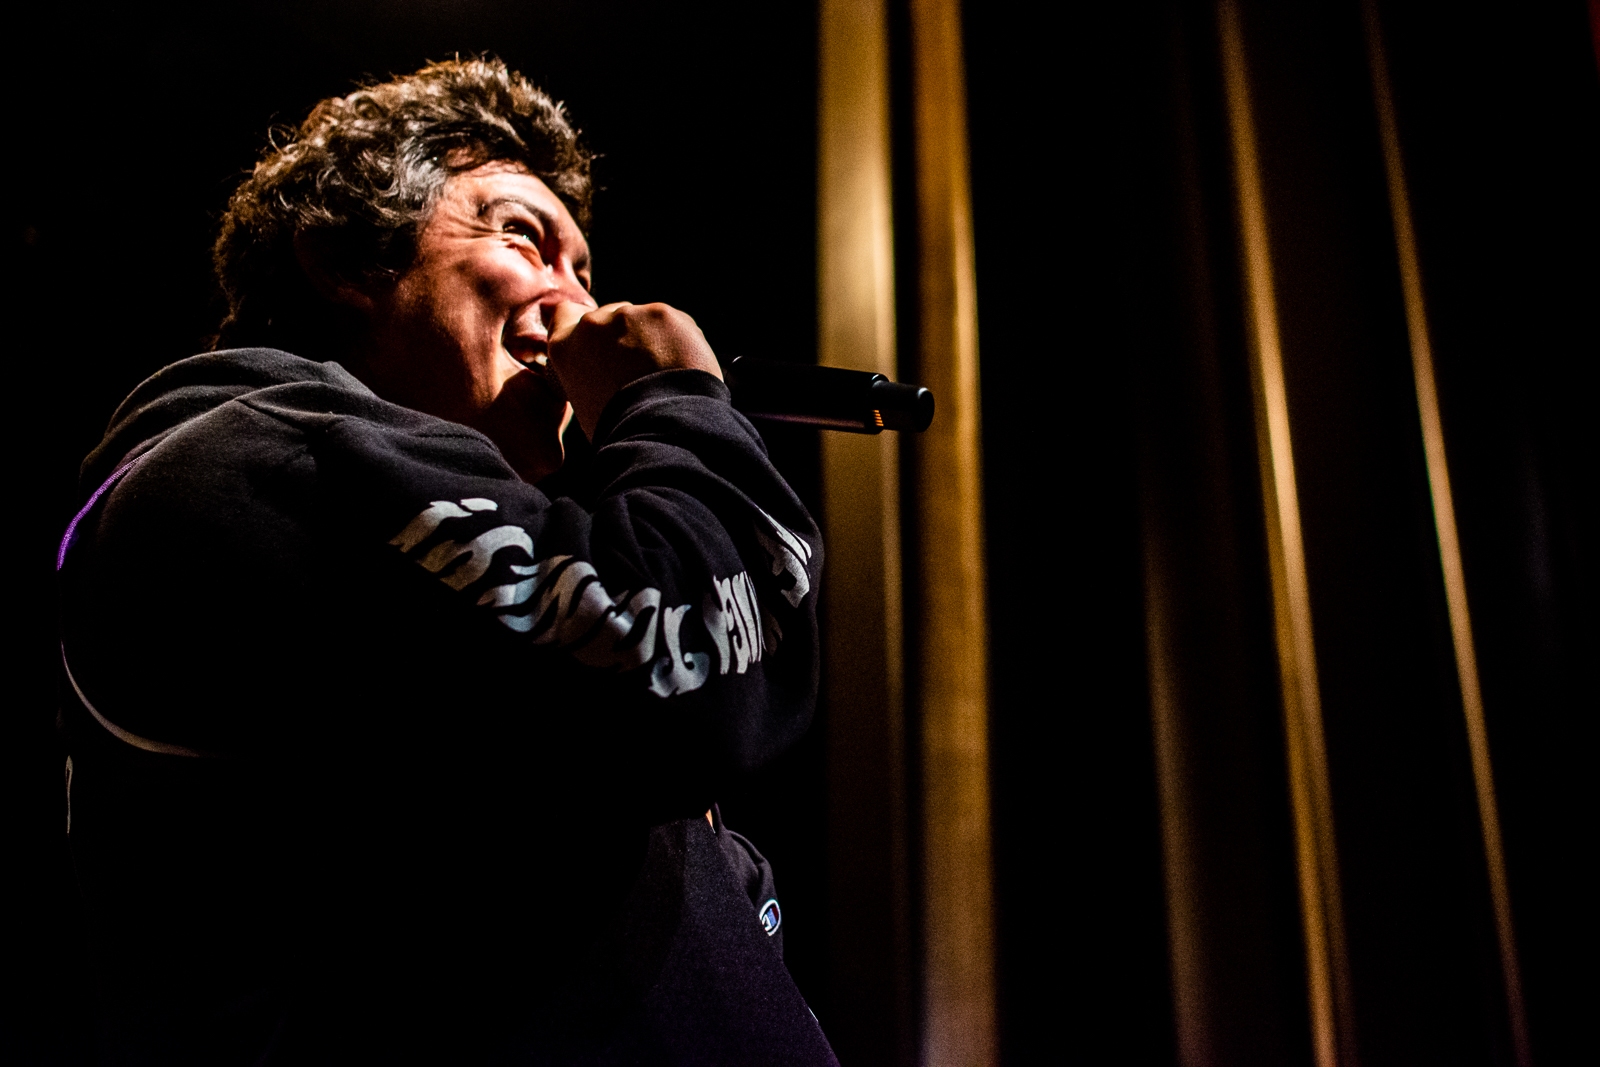 Hobo Johnson & The Lovemakers @ Vogue Theatre - Oct 10 2019